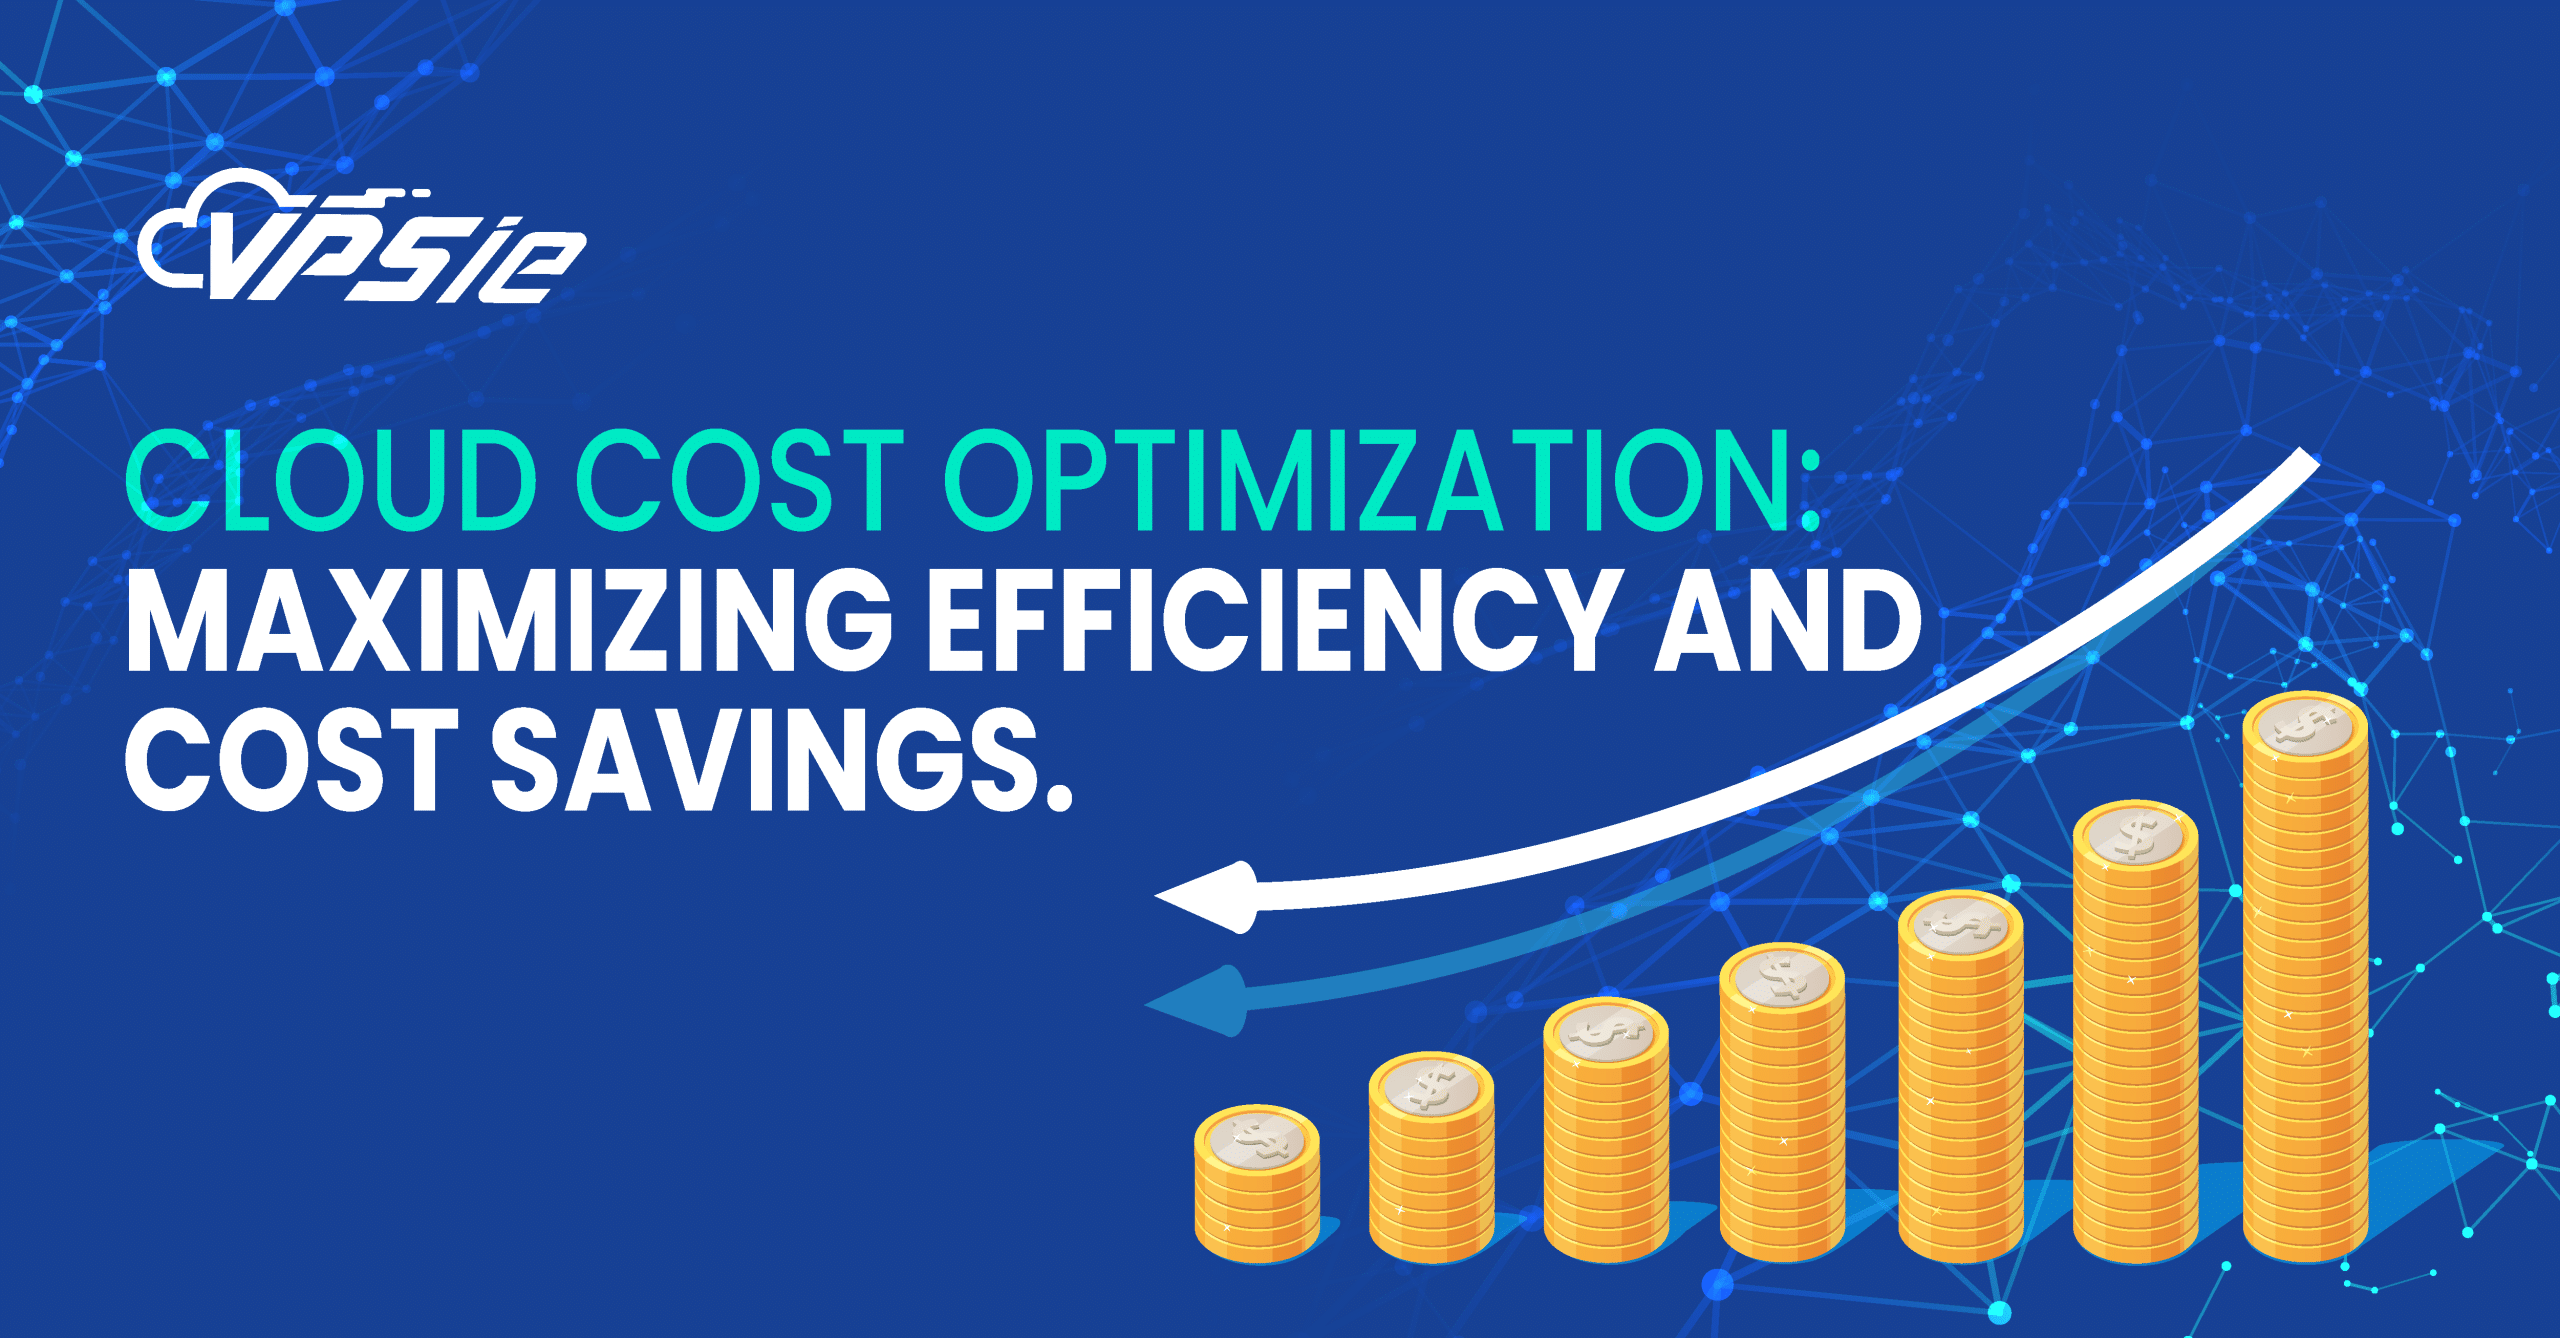 Could cost optimization